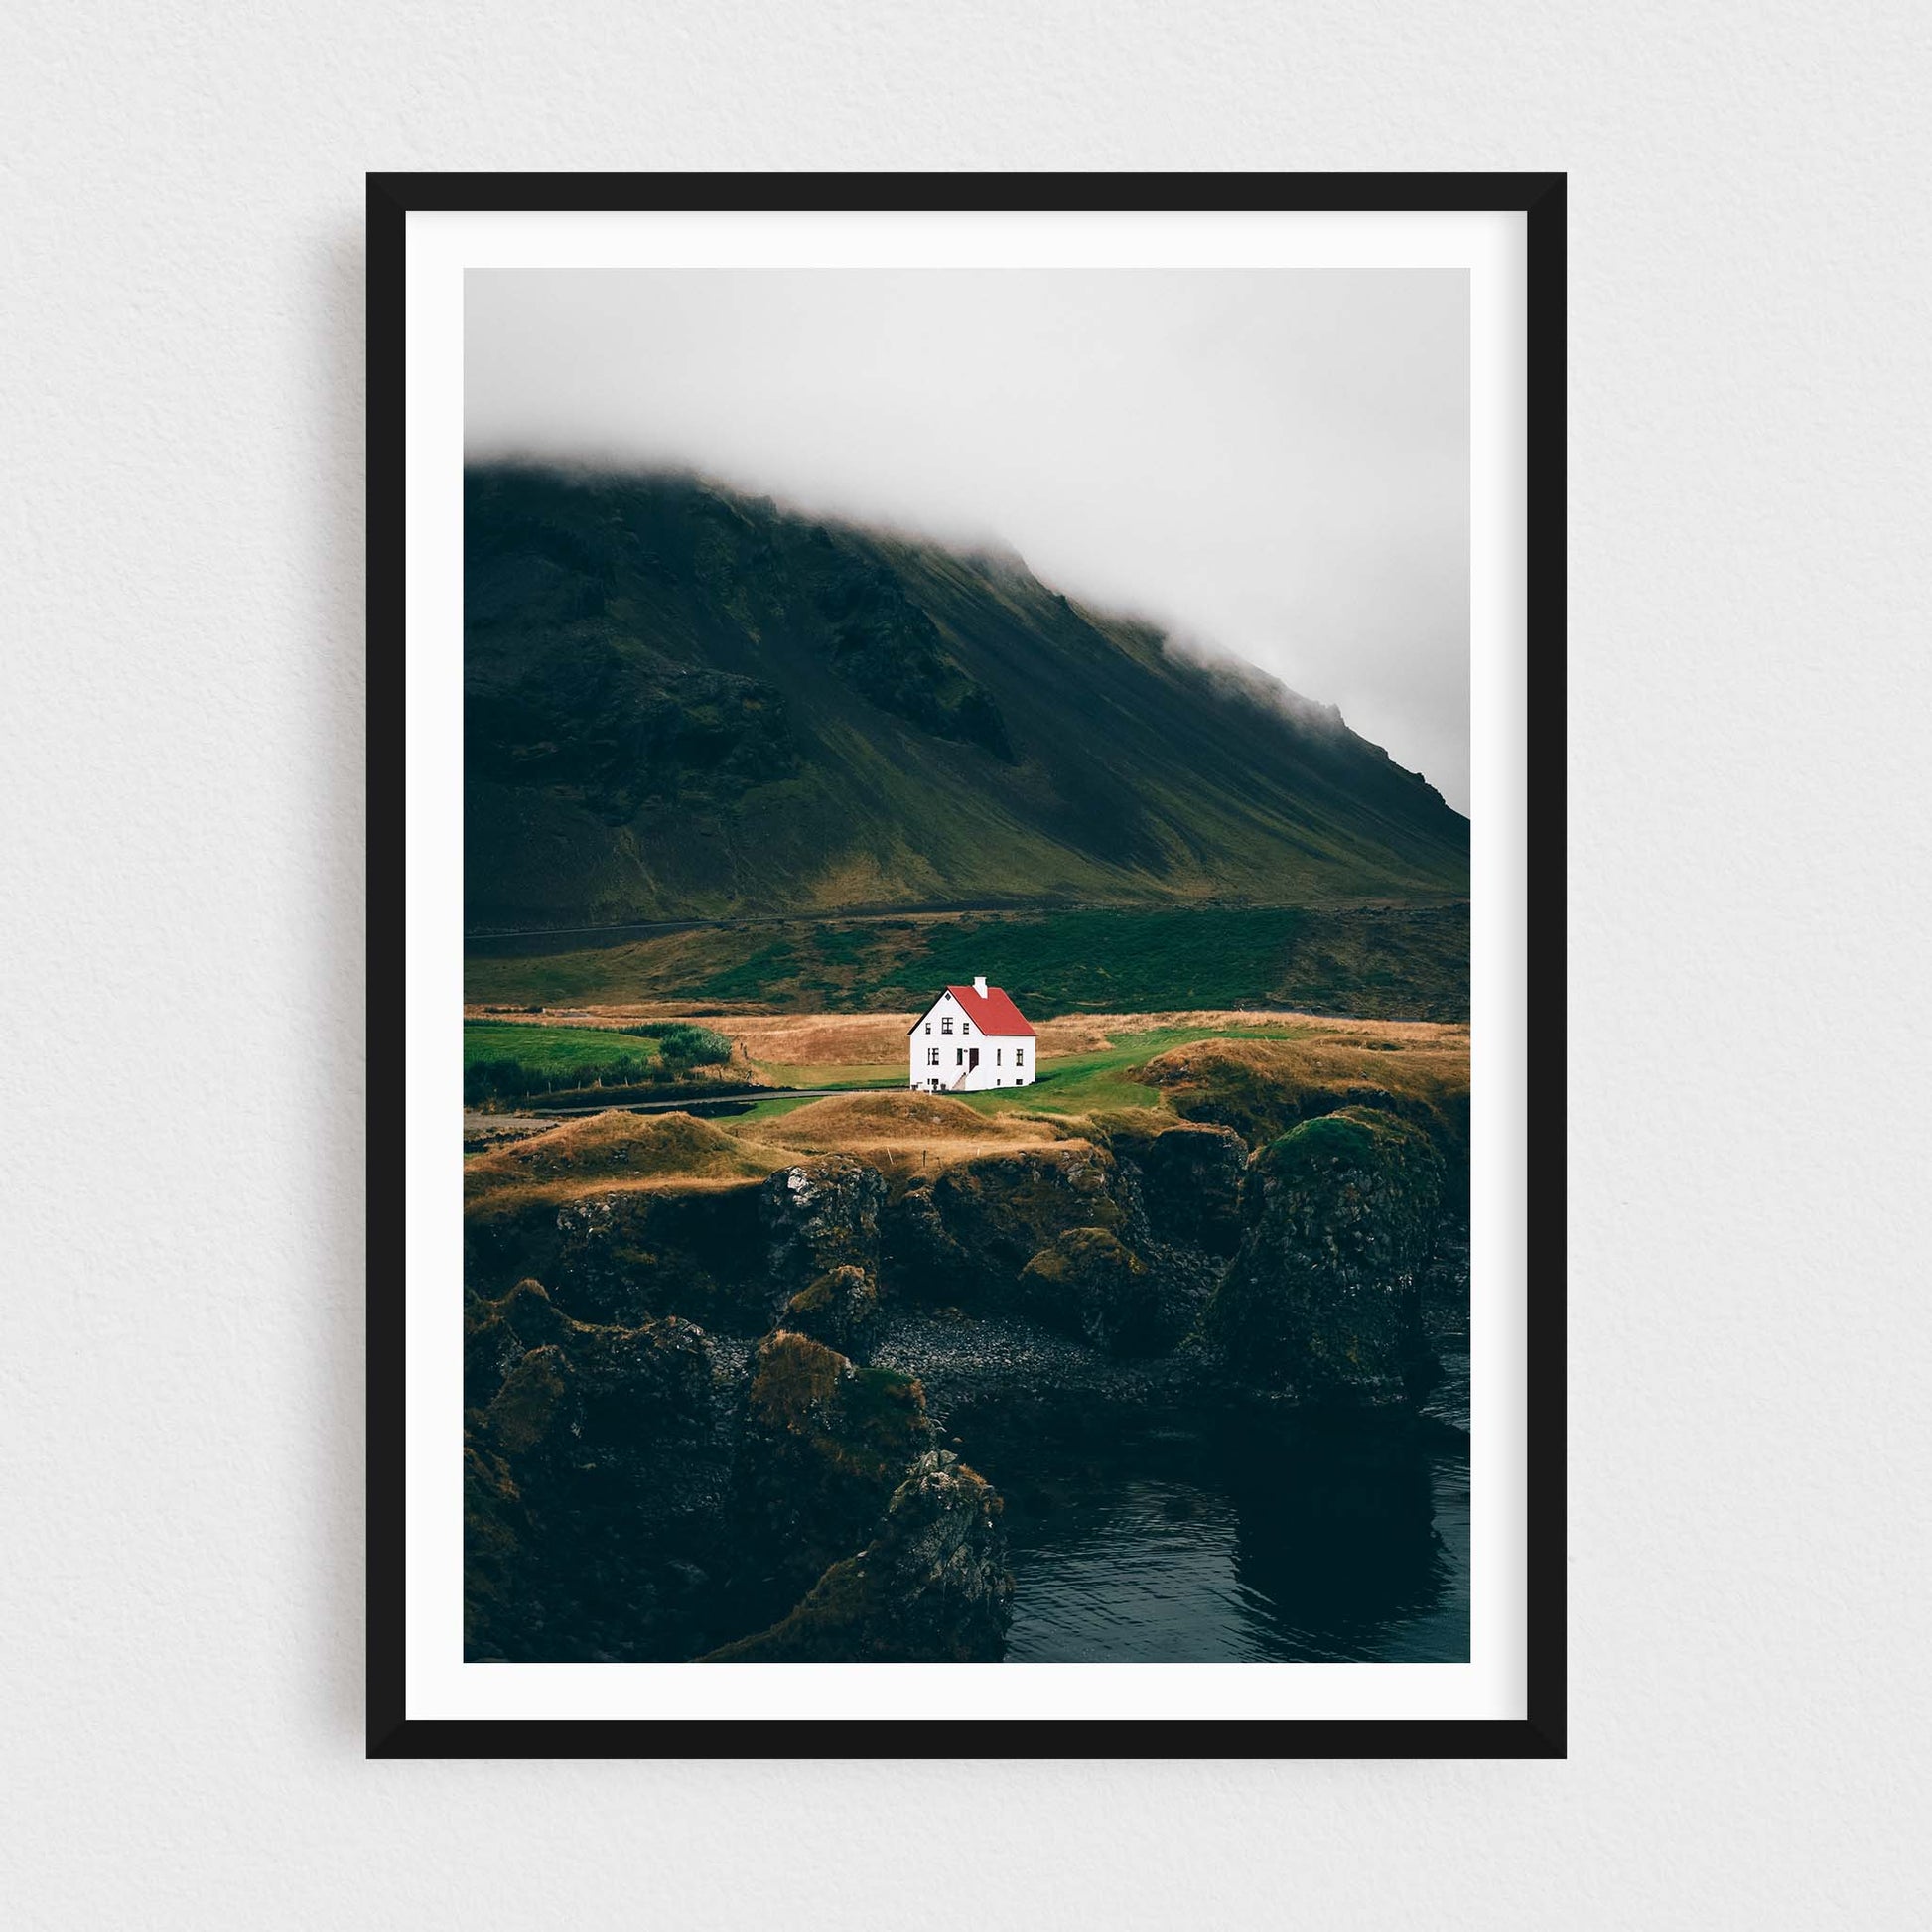 Iceland fine art photography print featuring Arnarstapi lonely house, in a black frame